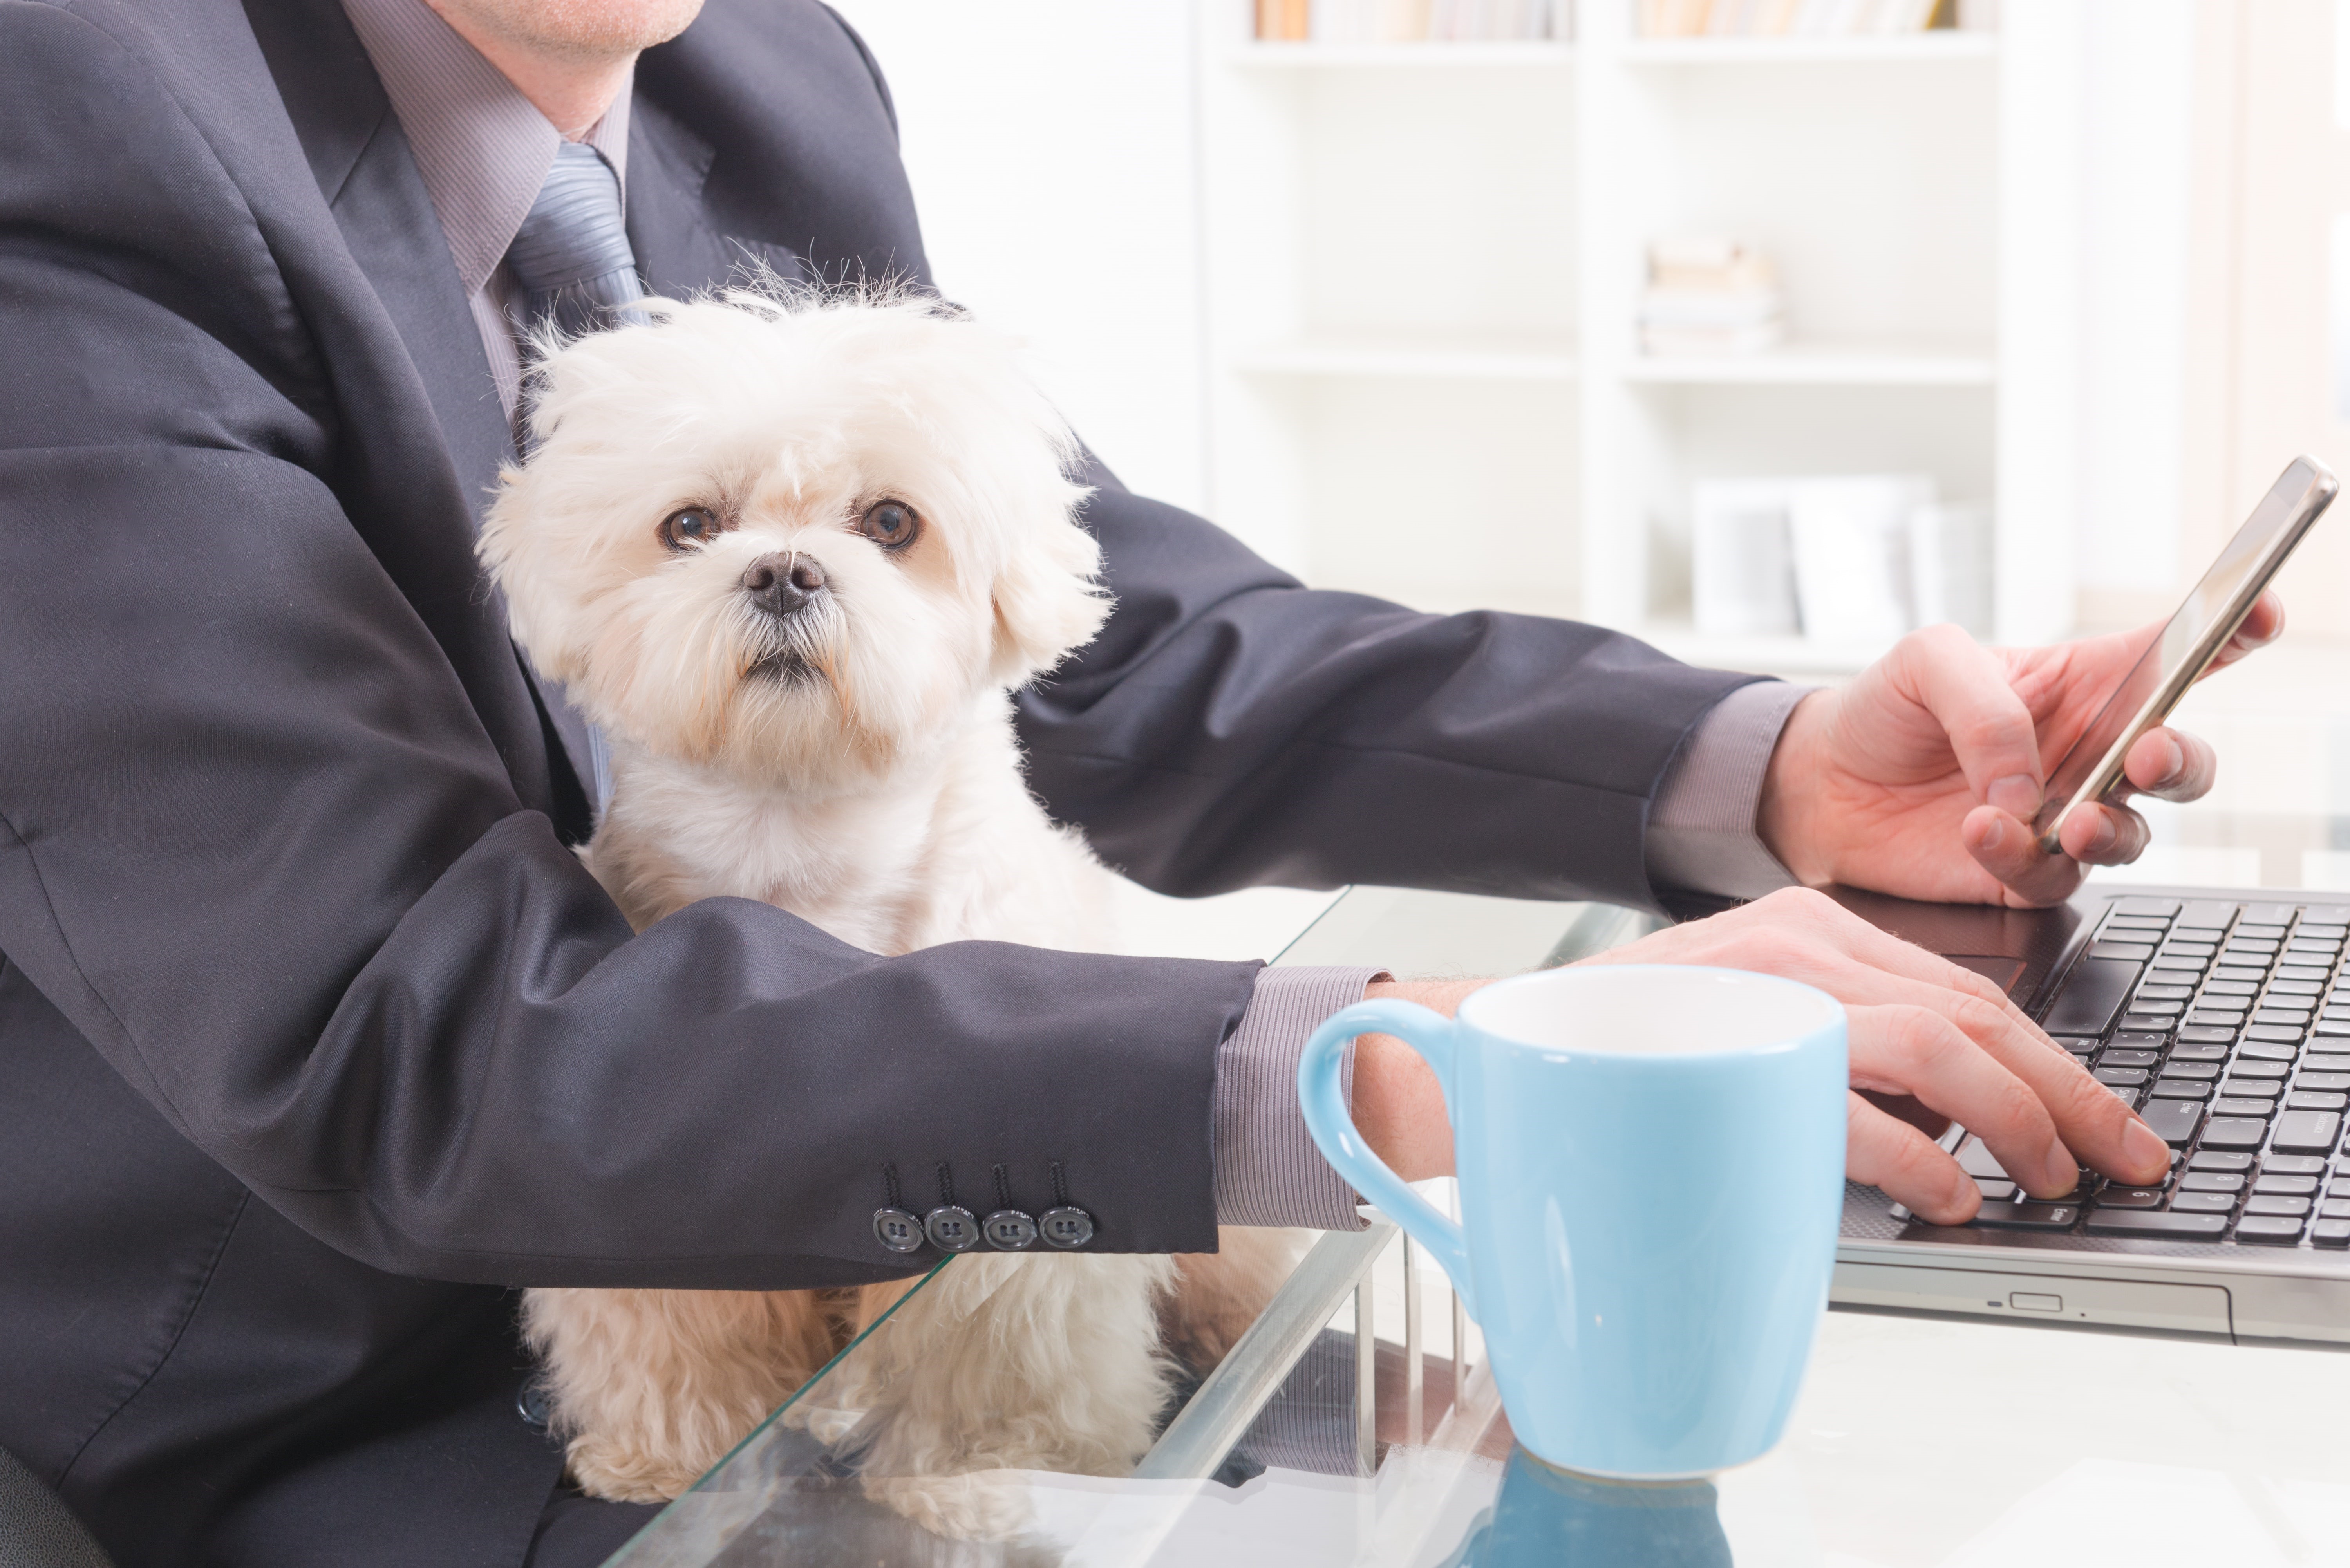 Bring Your Dog to Work Day Blog